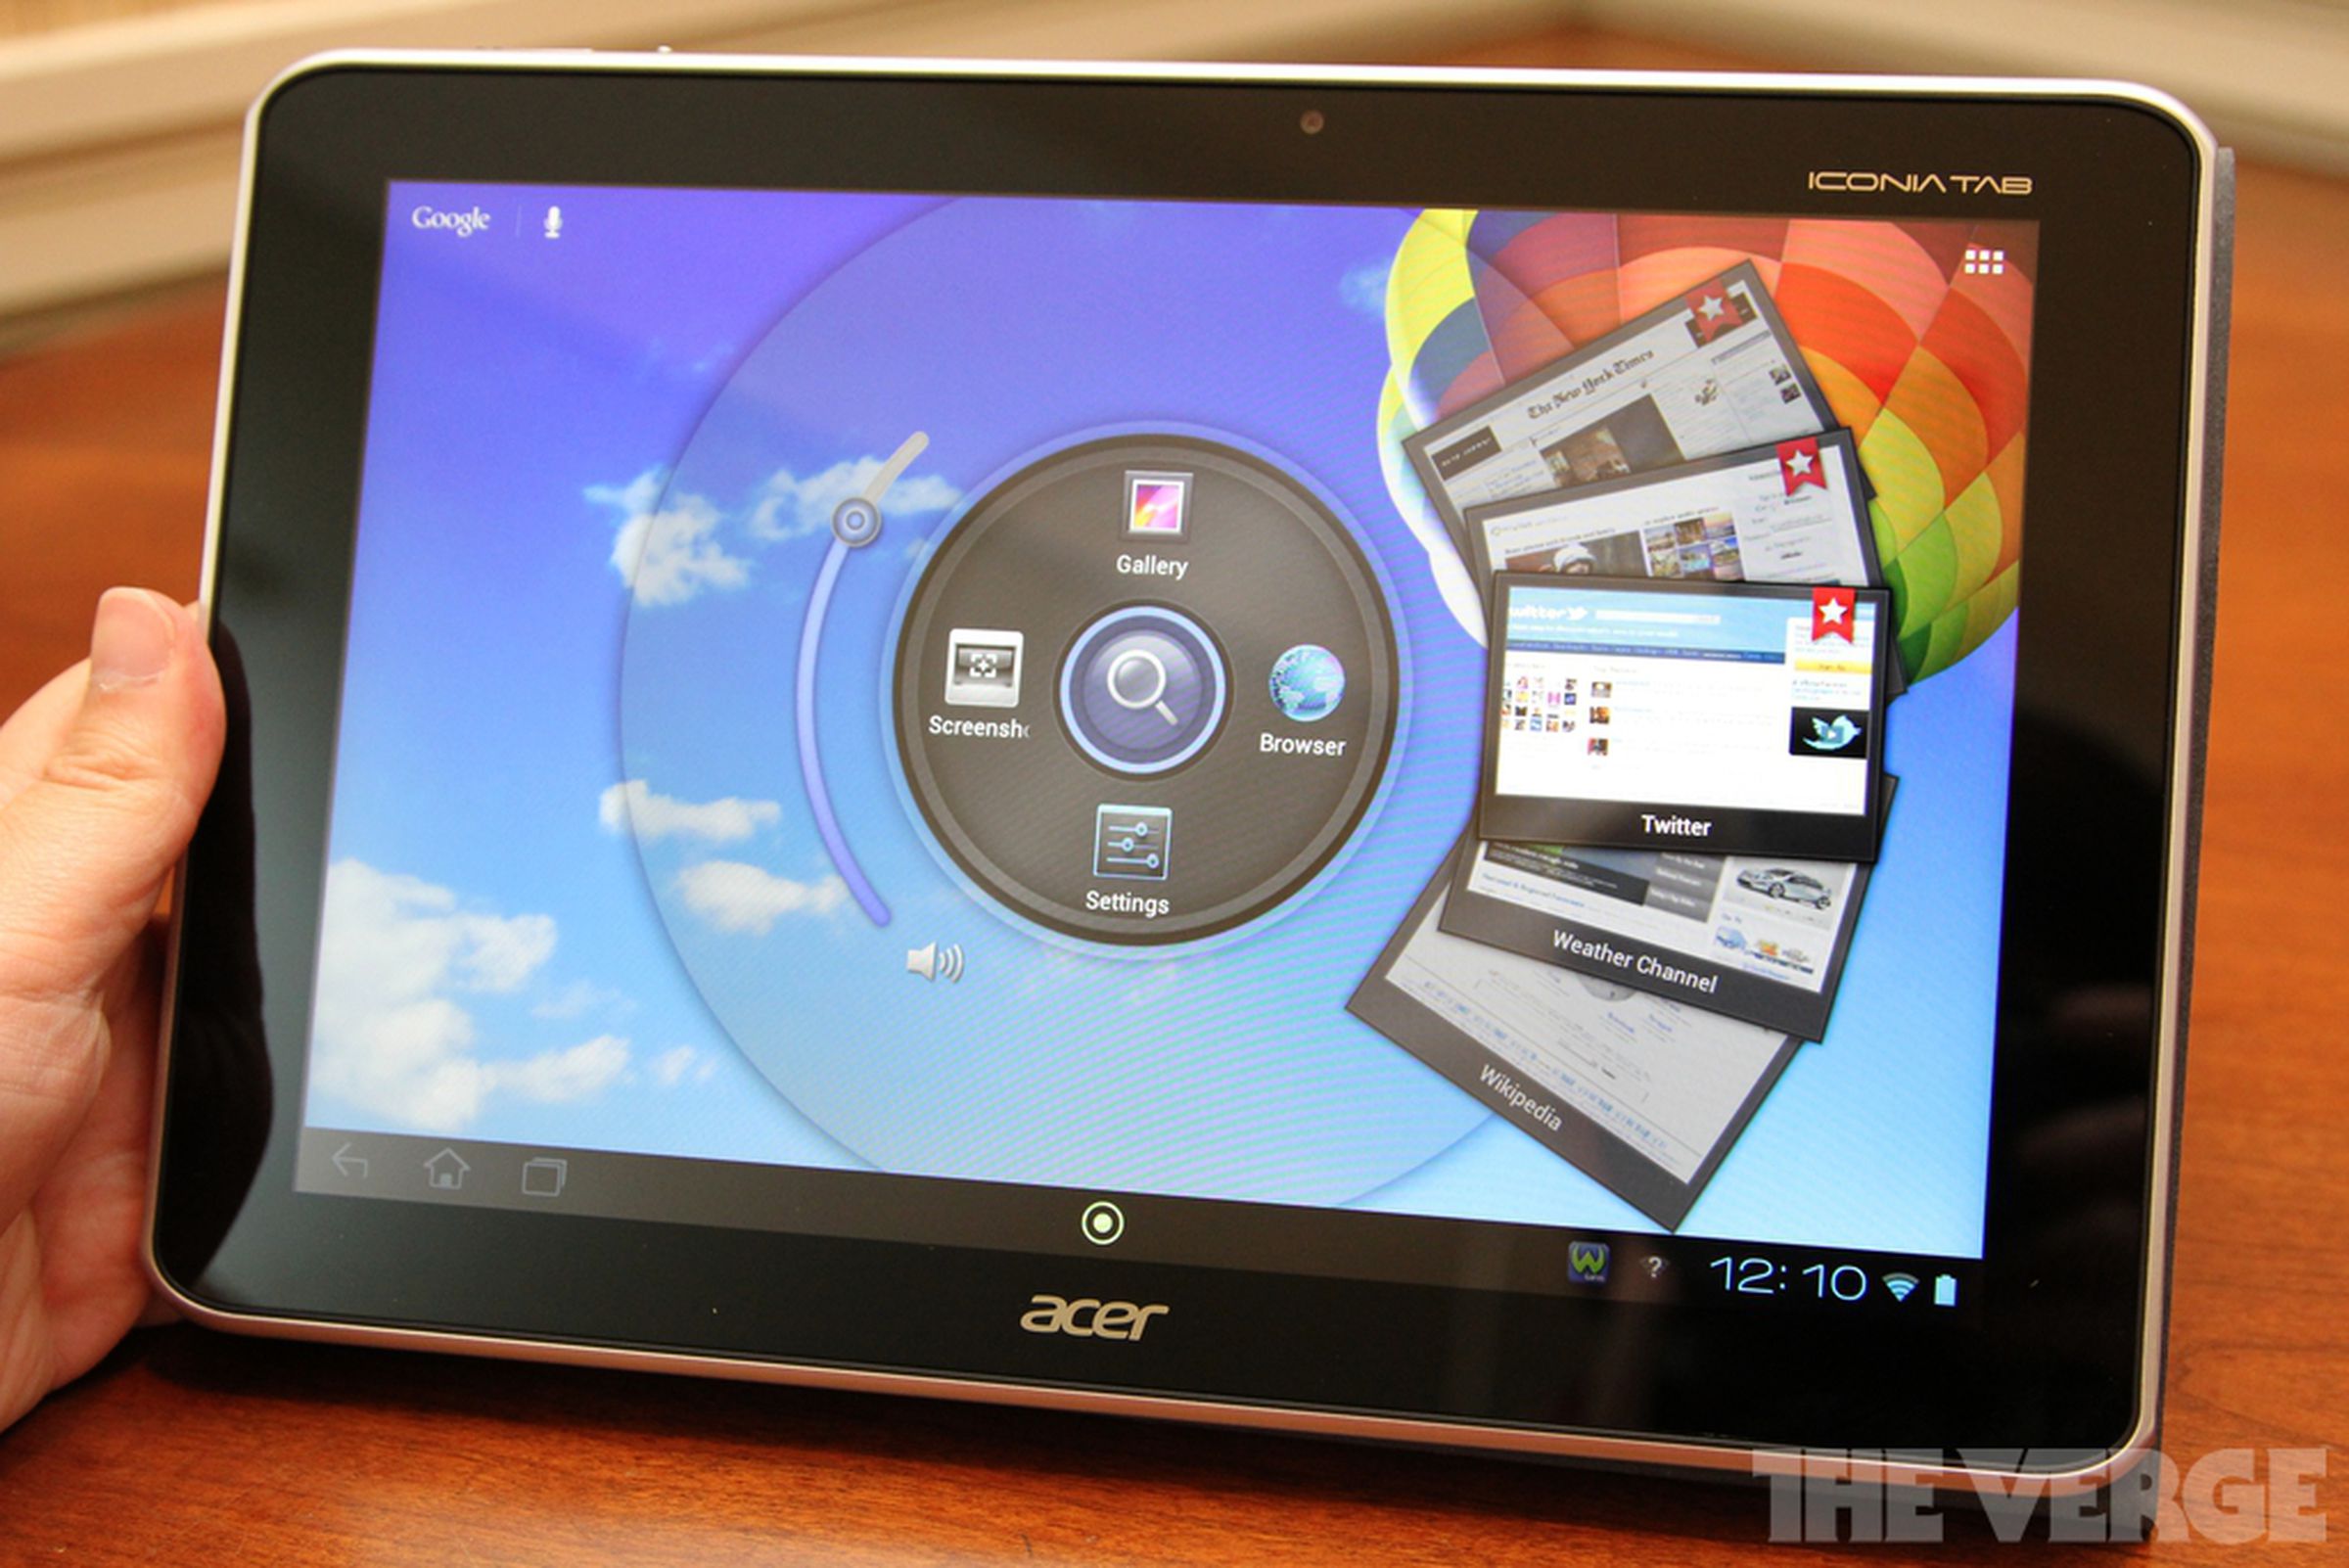 Acer Iconia Tab A700 hands-on pictures